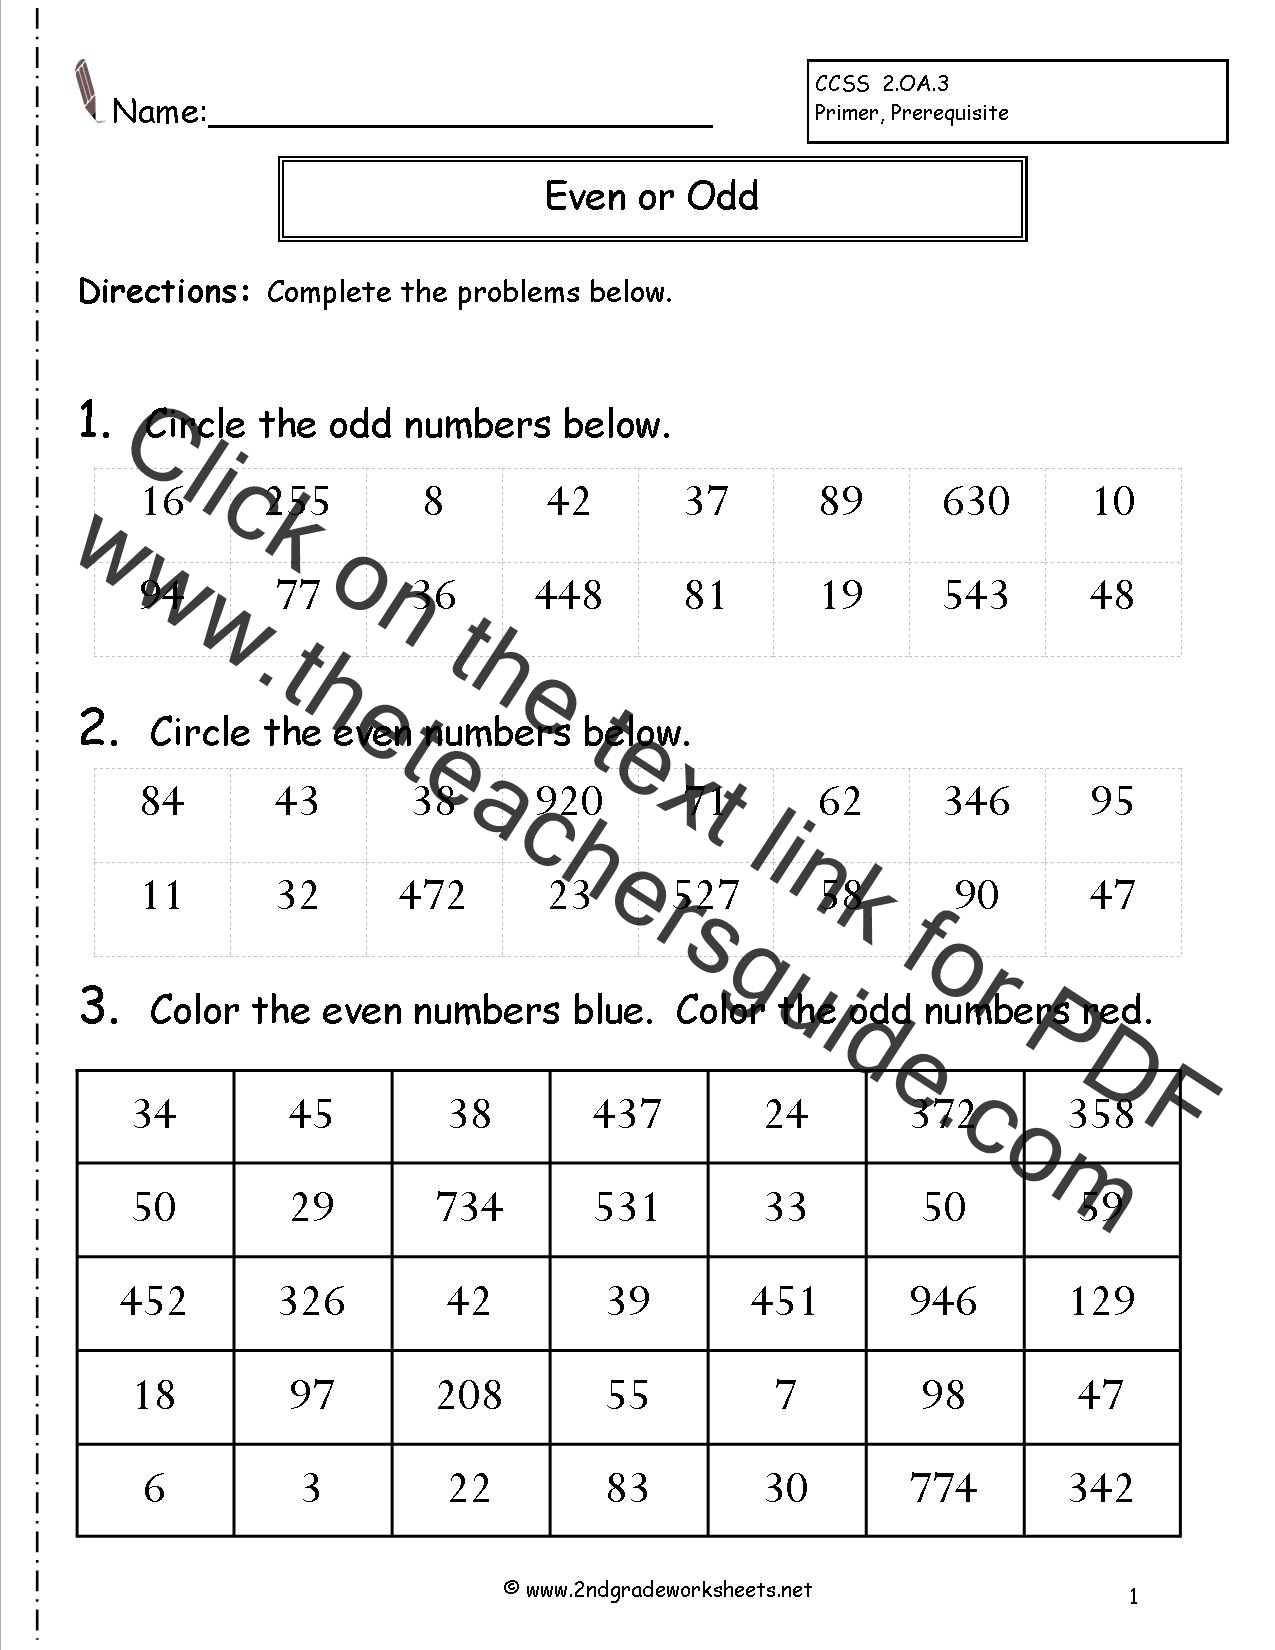 odd-and-even-numbers-worksheet